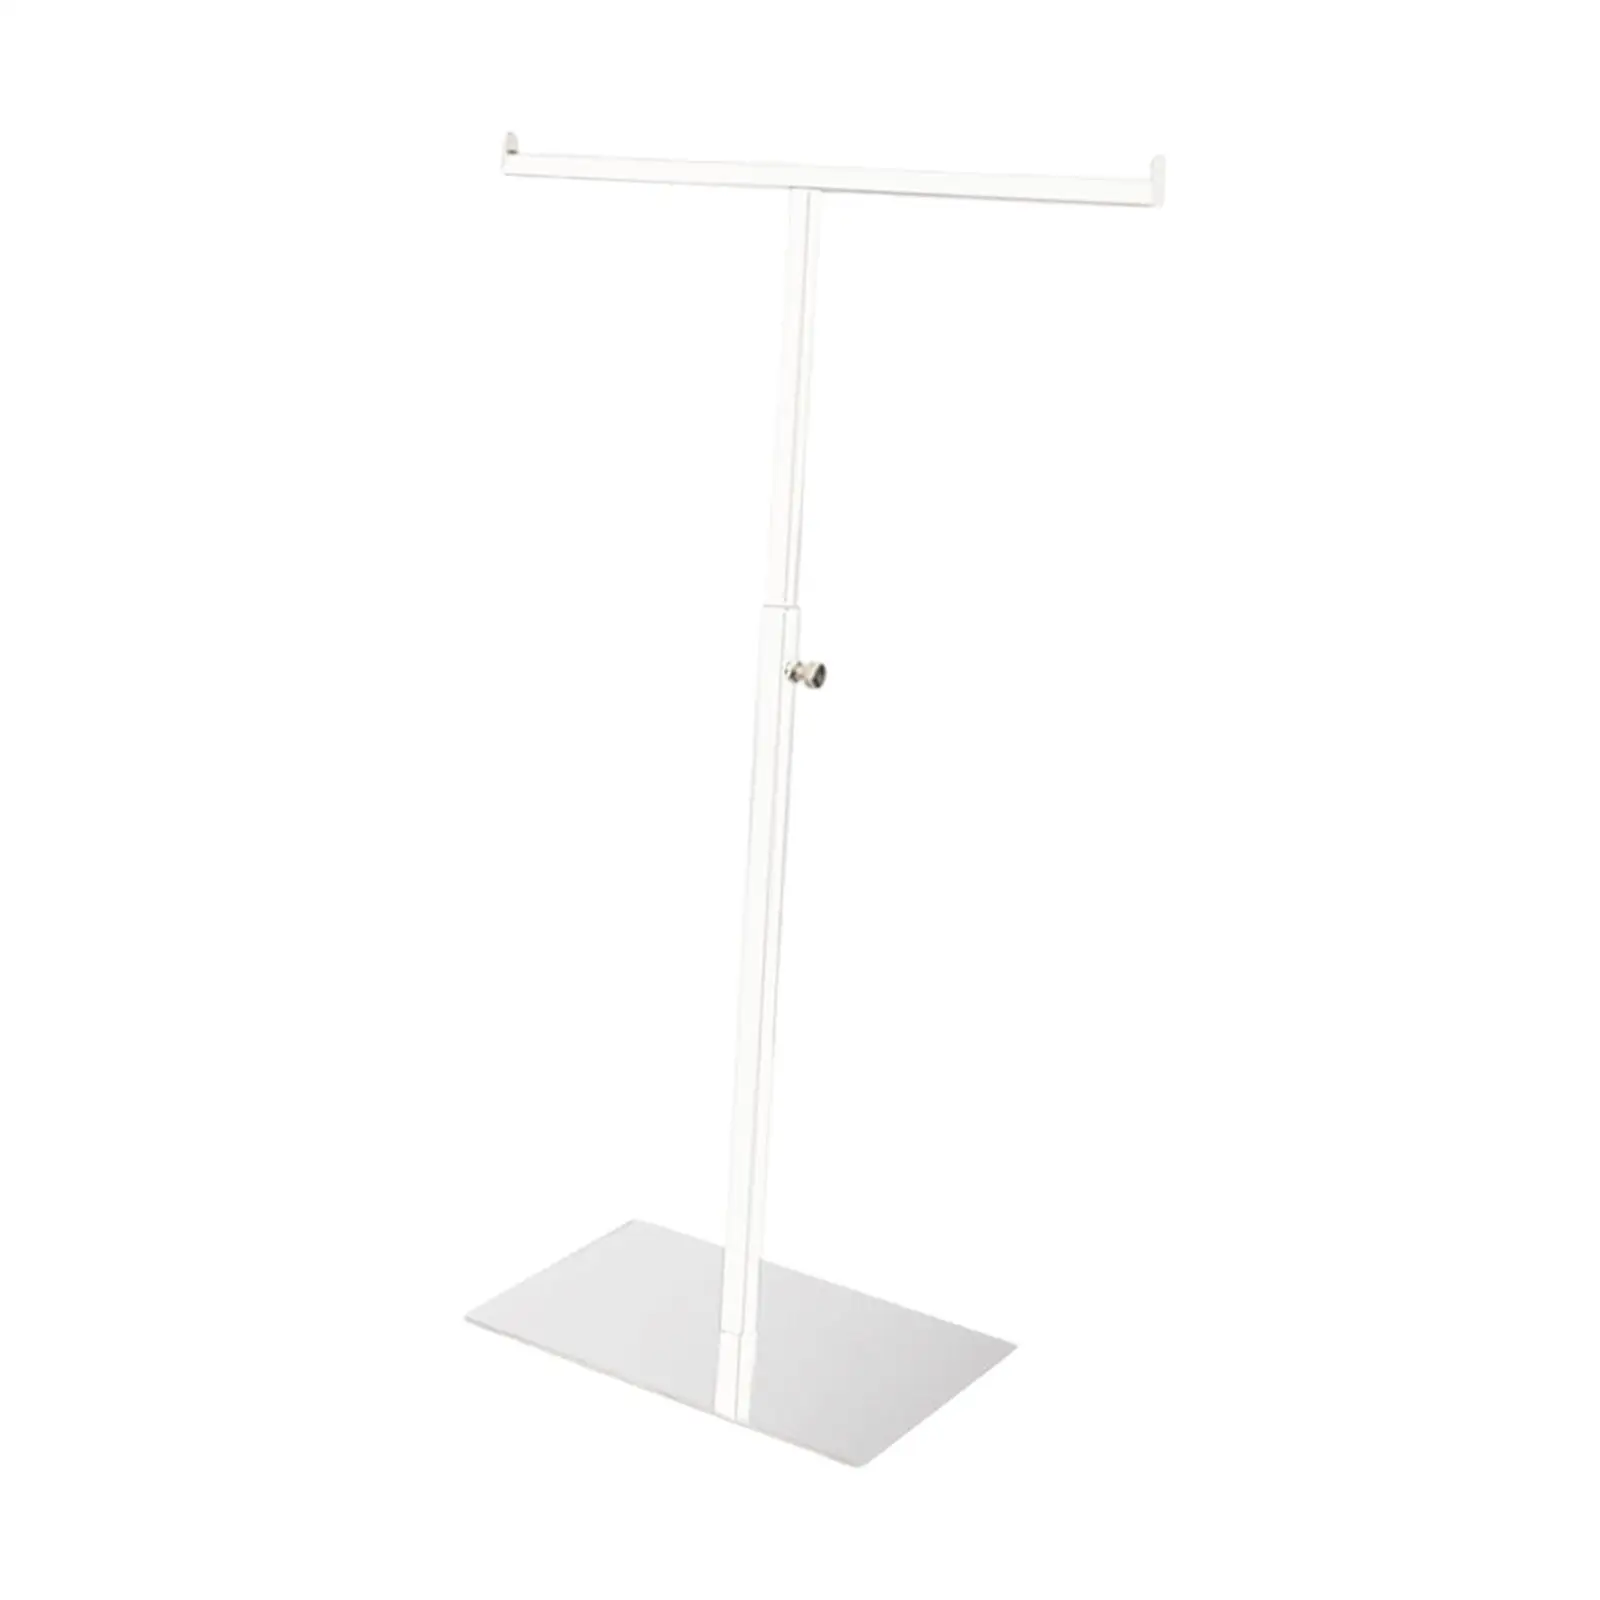 Stainless Steel Necklace Earring Holder Freestanding T Shape Necklace Display Stand for Countertop Shop Bathroom Scarf Necktie